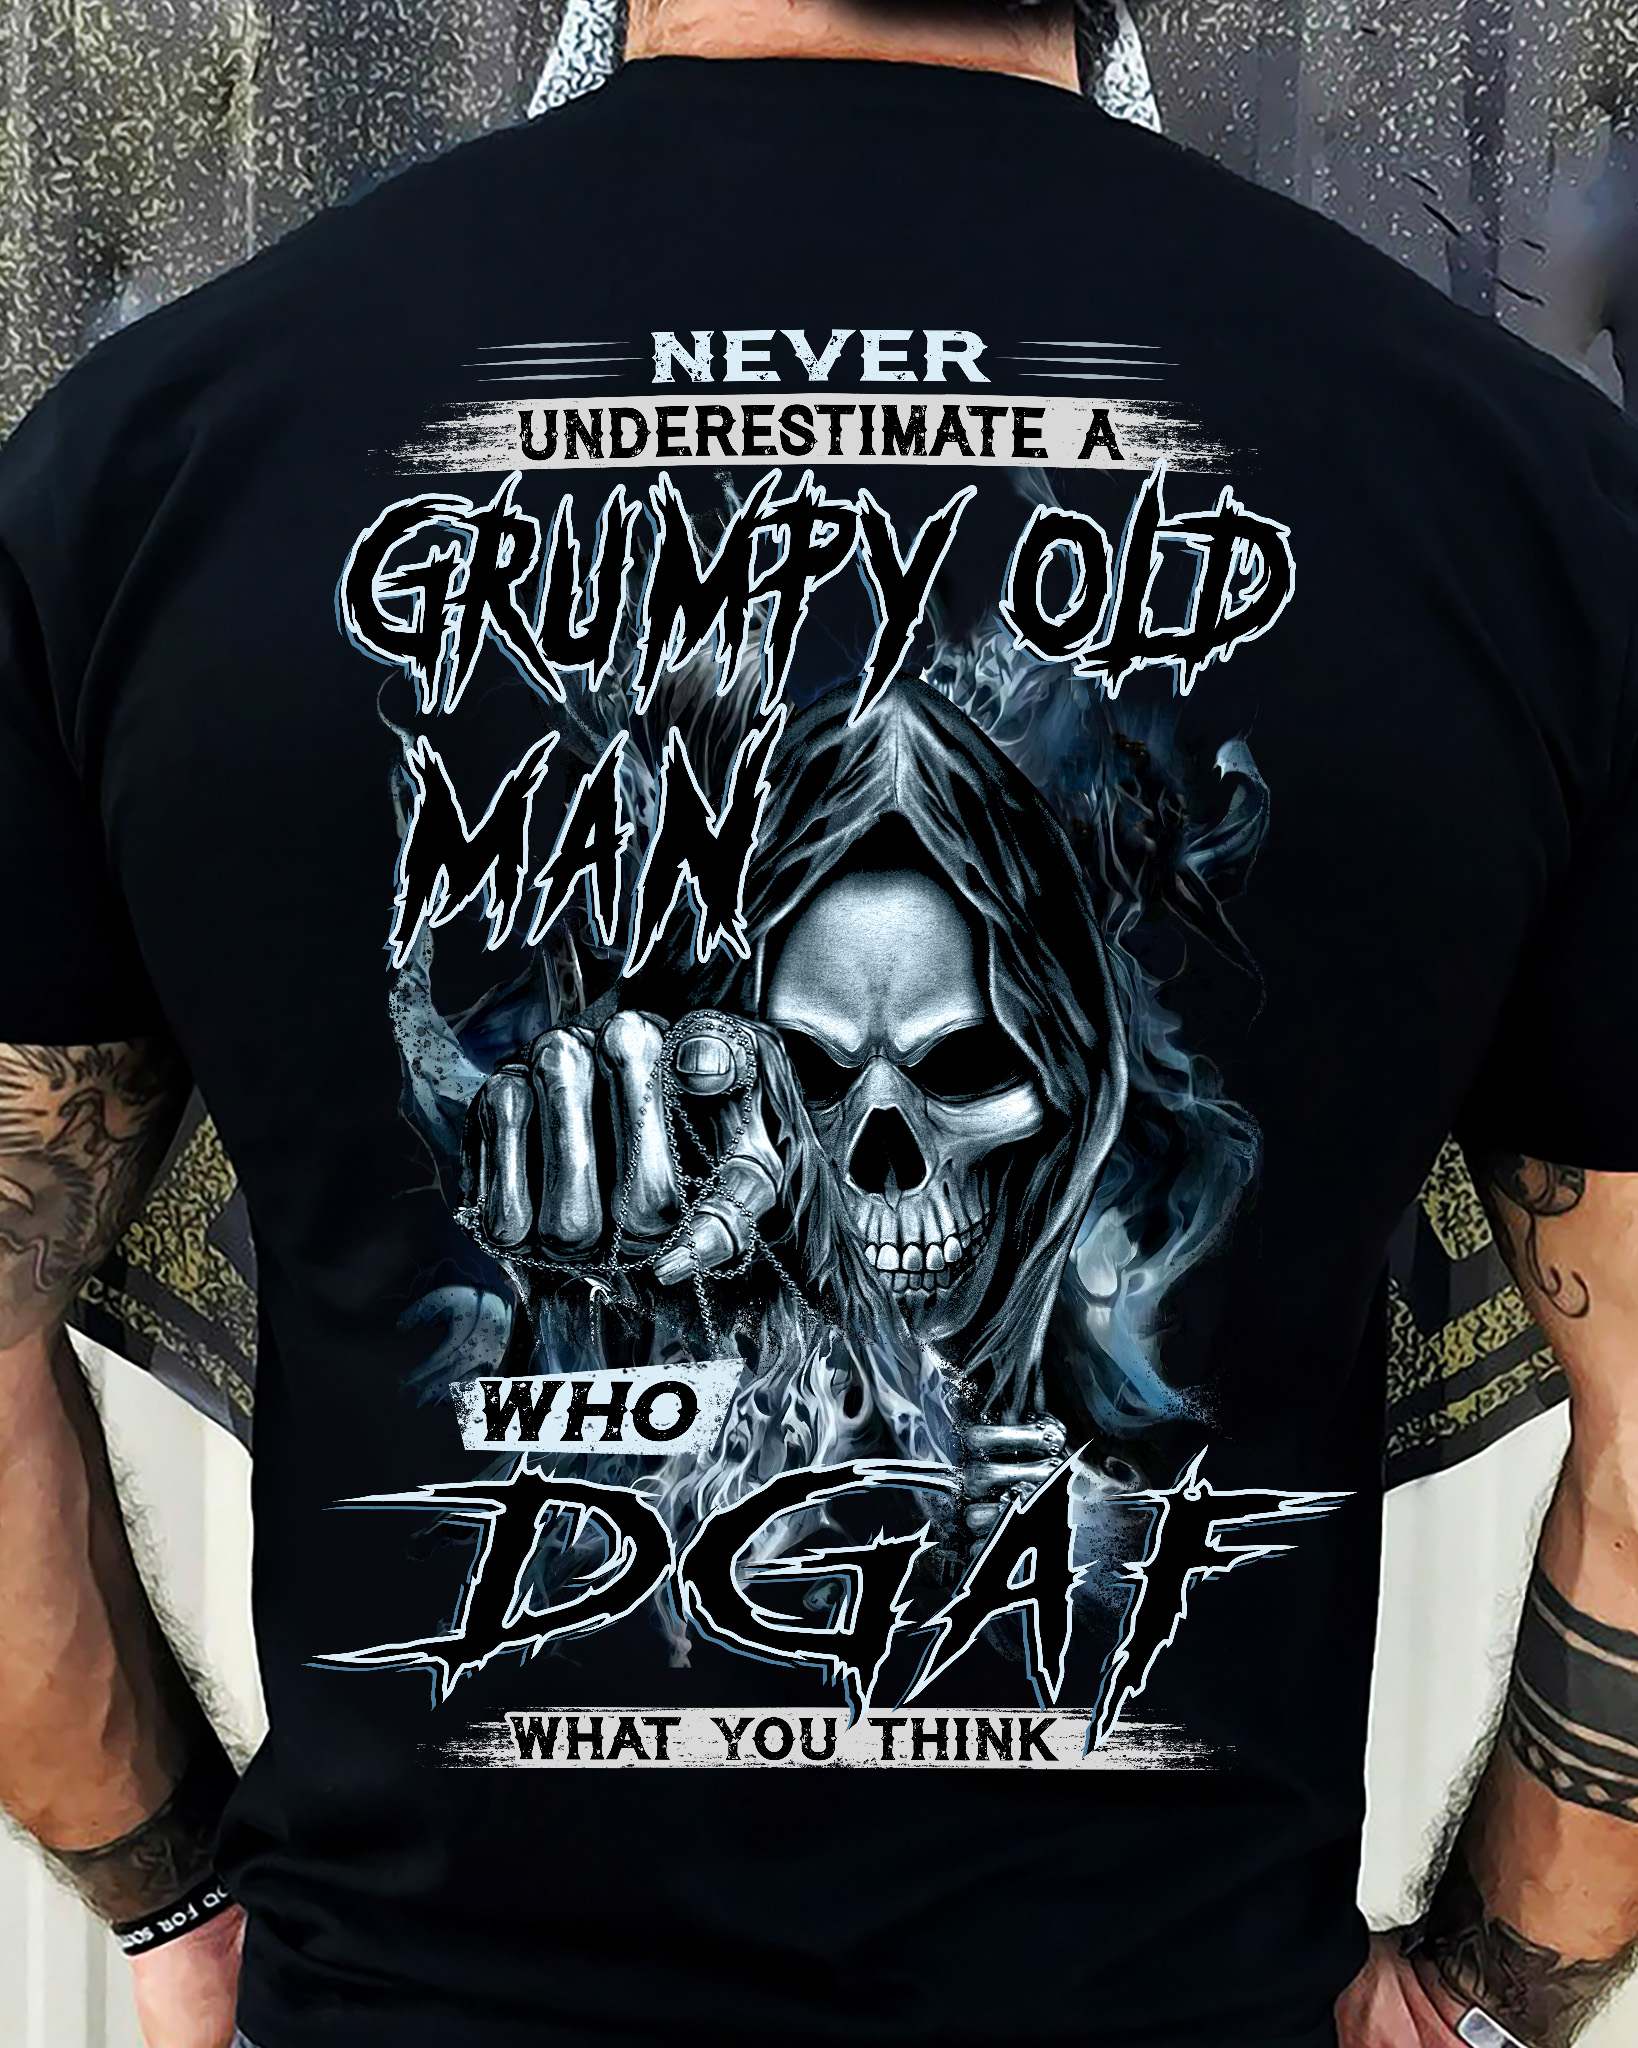 Never underestimate a grumpy old man who DGAF what you think - Black evil